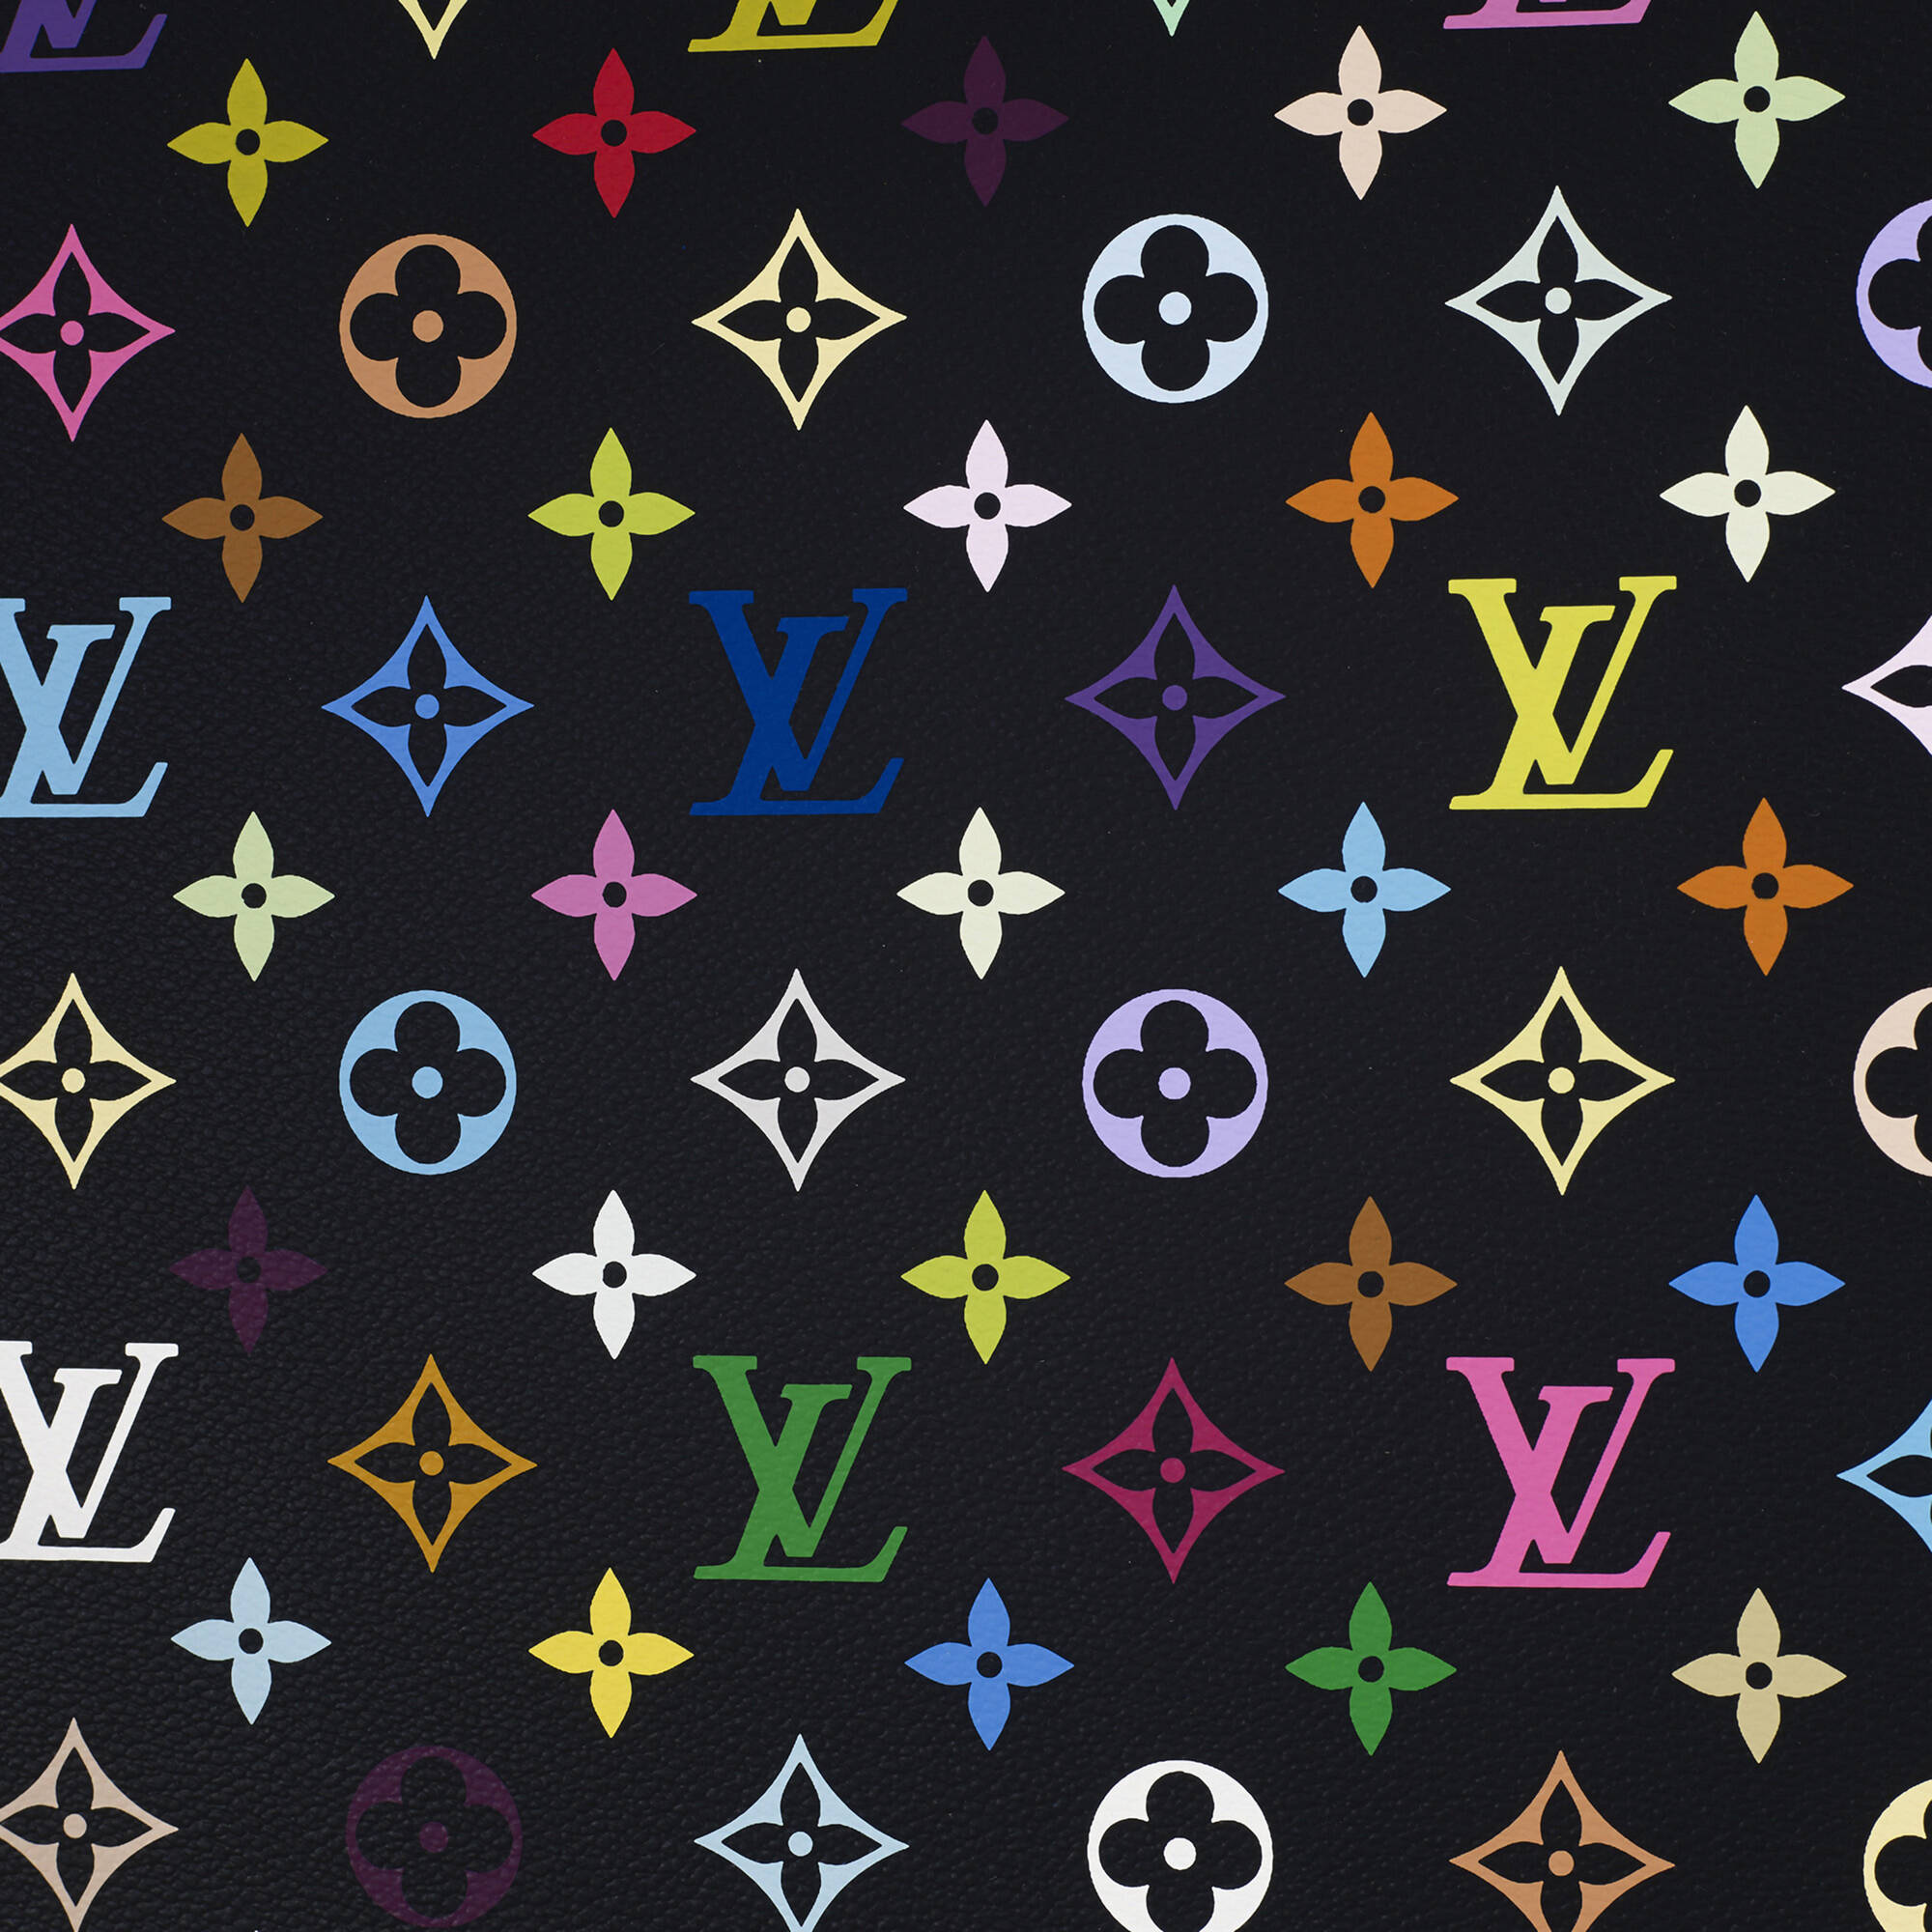 social pensionist linse 177: TAKASHI MURAKAMI AND LOUIS VUITTON, Monogram Multicolore - black <  Design, 12 June 2014 < Auctions | Wright: Auctions of Art and Design